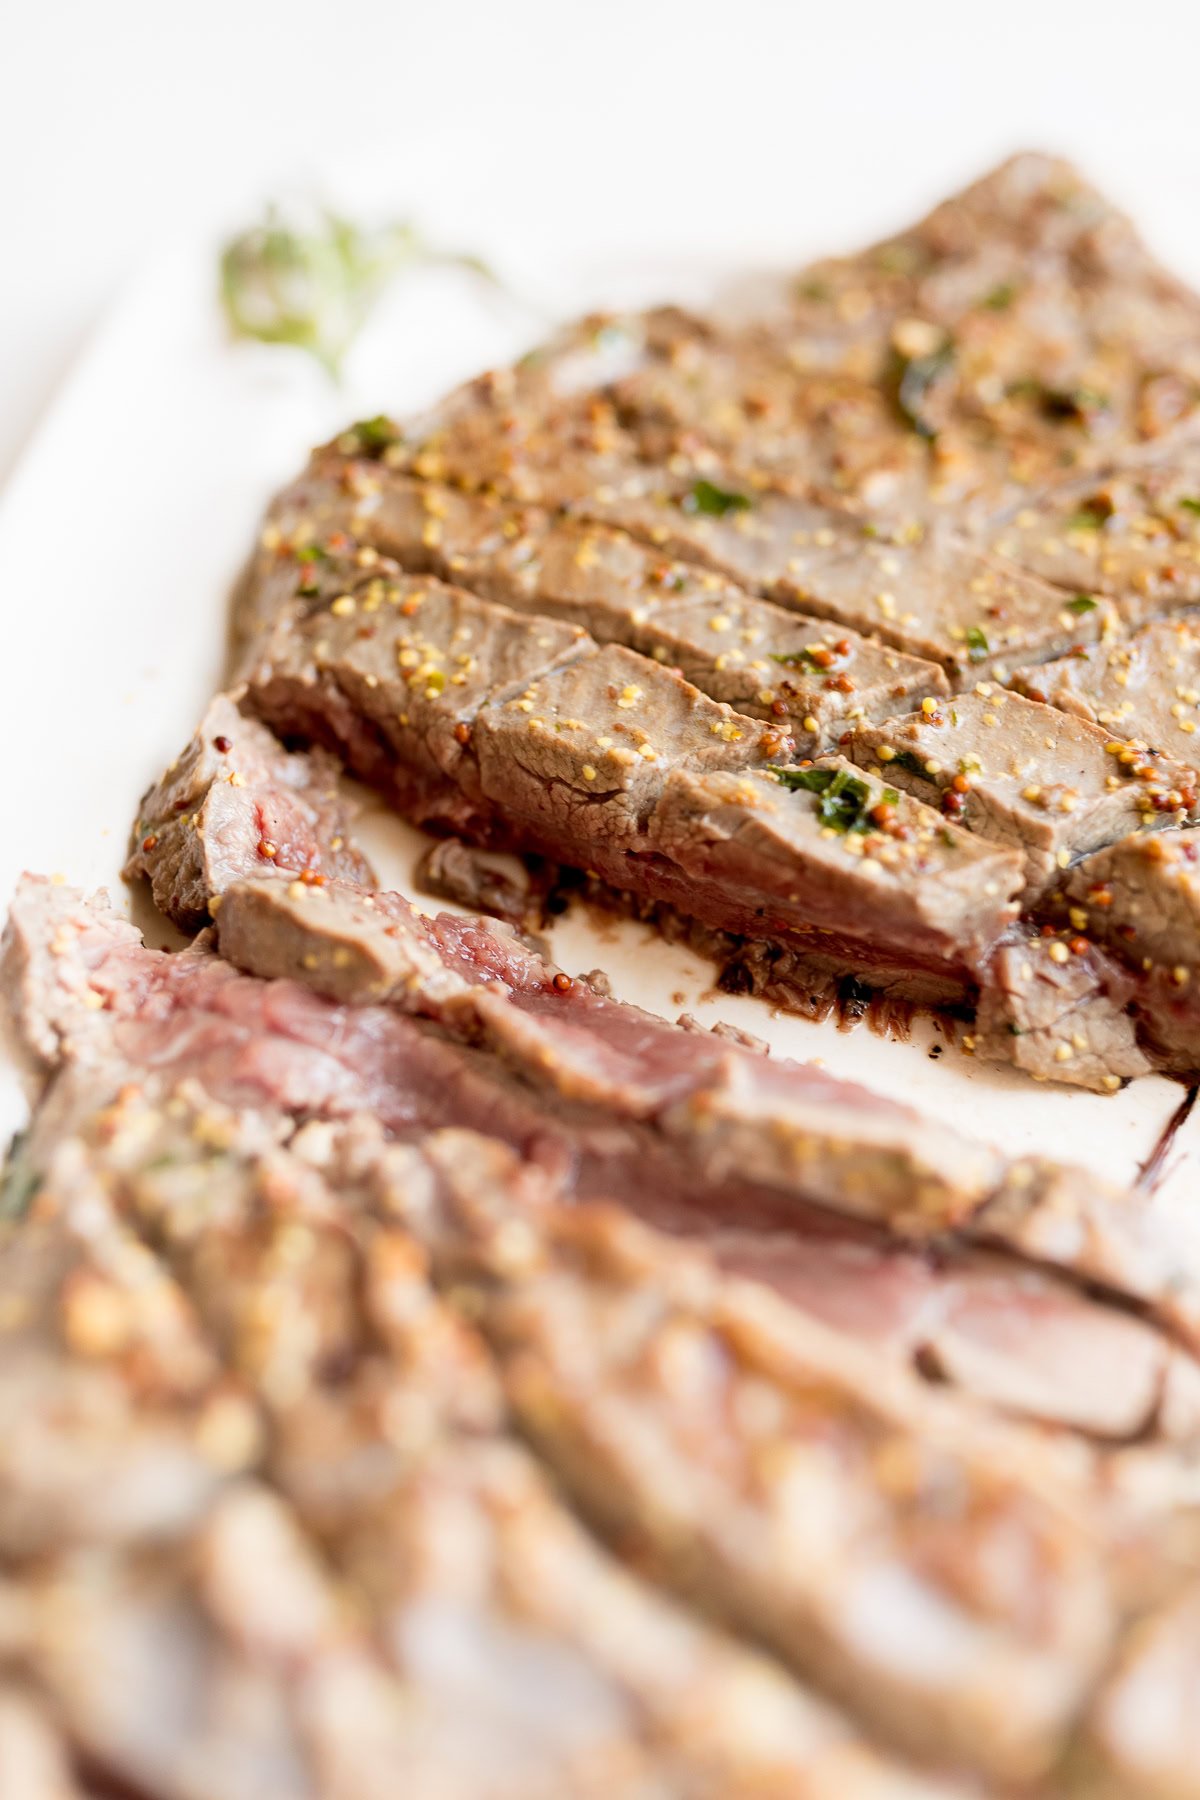 Close-up of sliced, medium-rare broiled steak on a white surface, seasoned with herbs and spices.